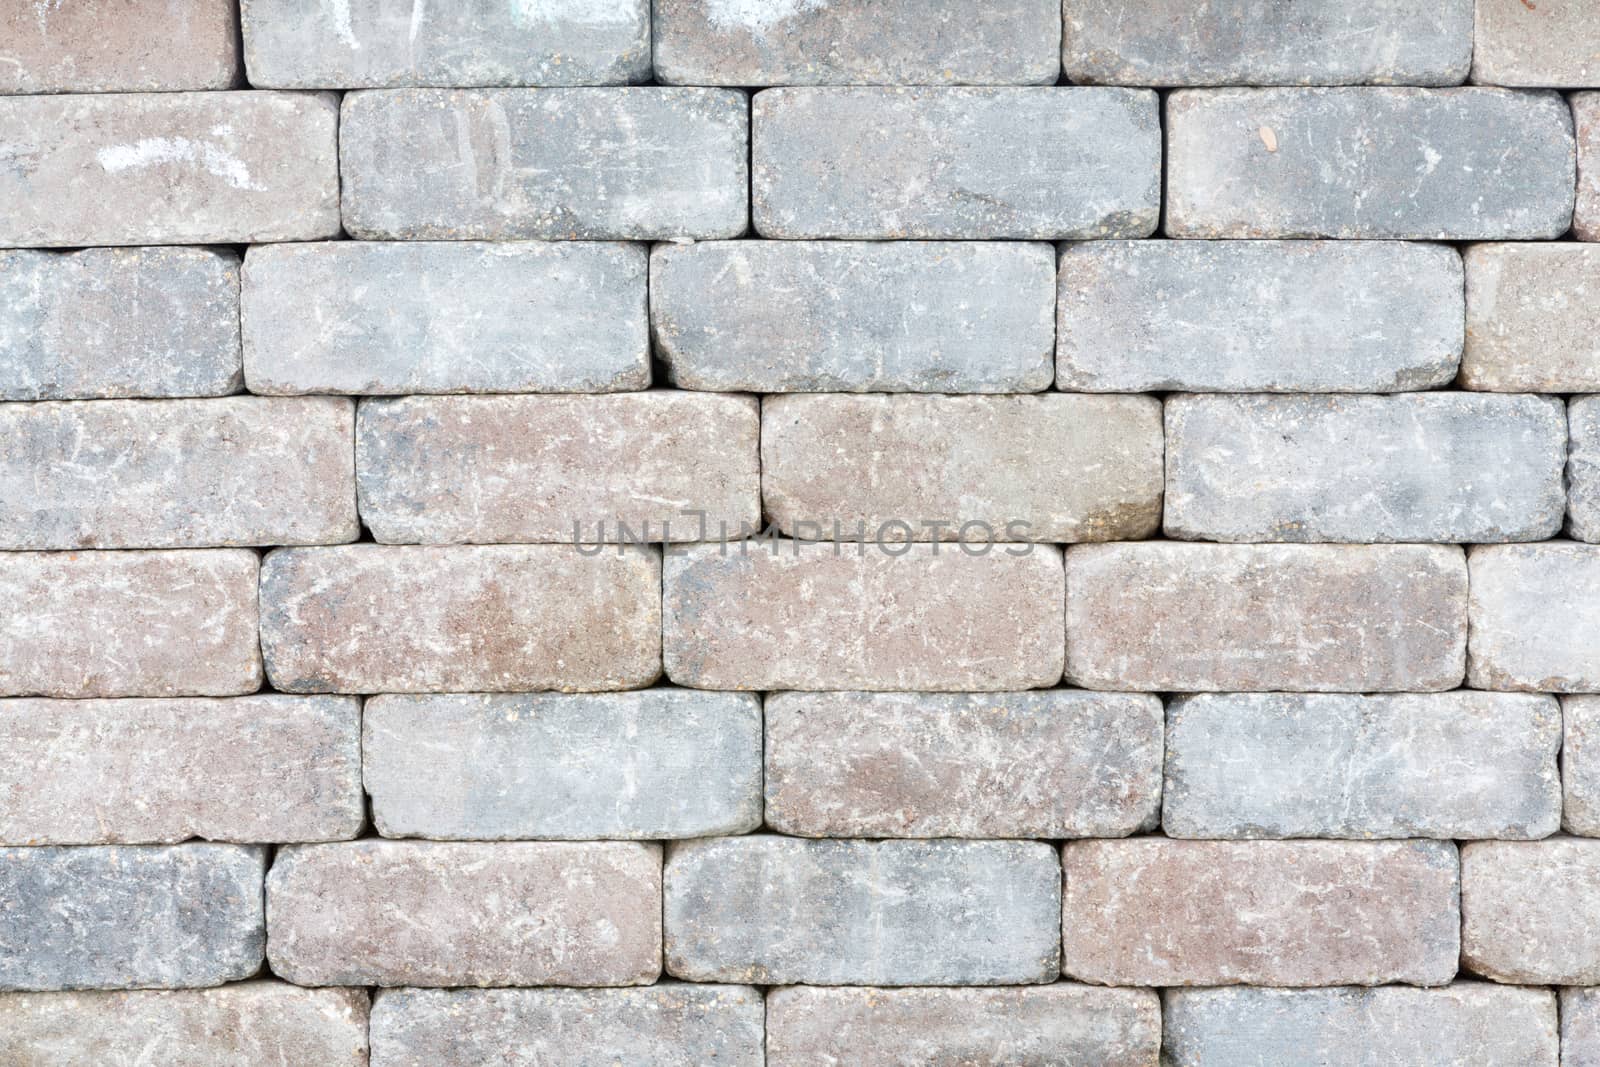 Background texture of a tumbled brick wall with aged variegated rectangular bricks with worn edges in a mortarless decorative construction